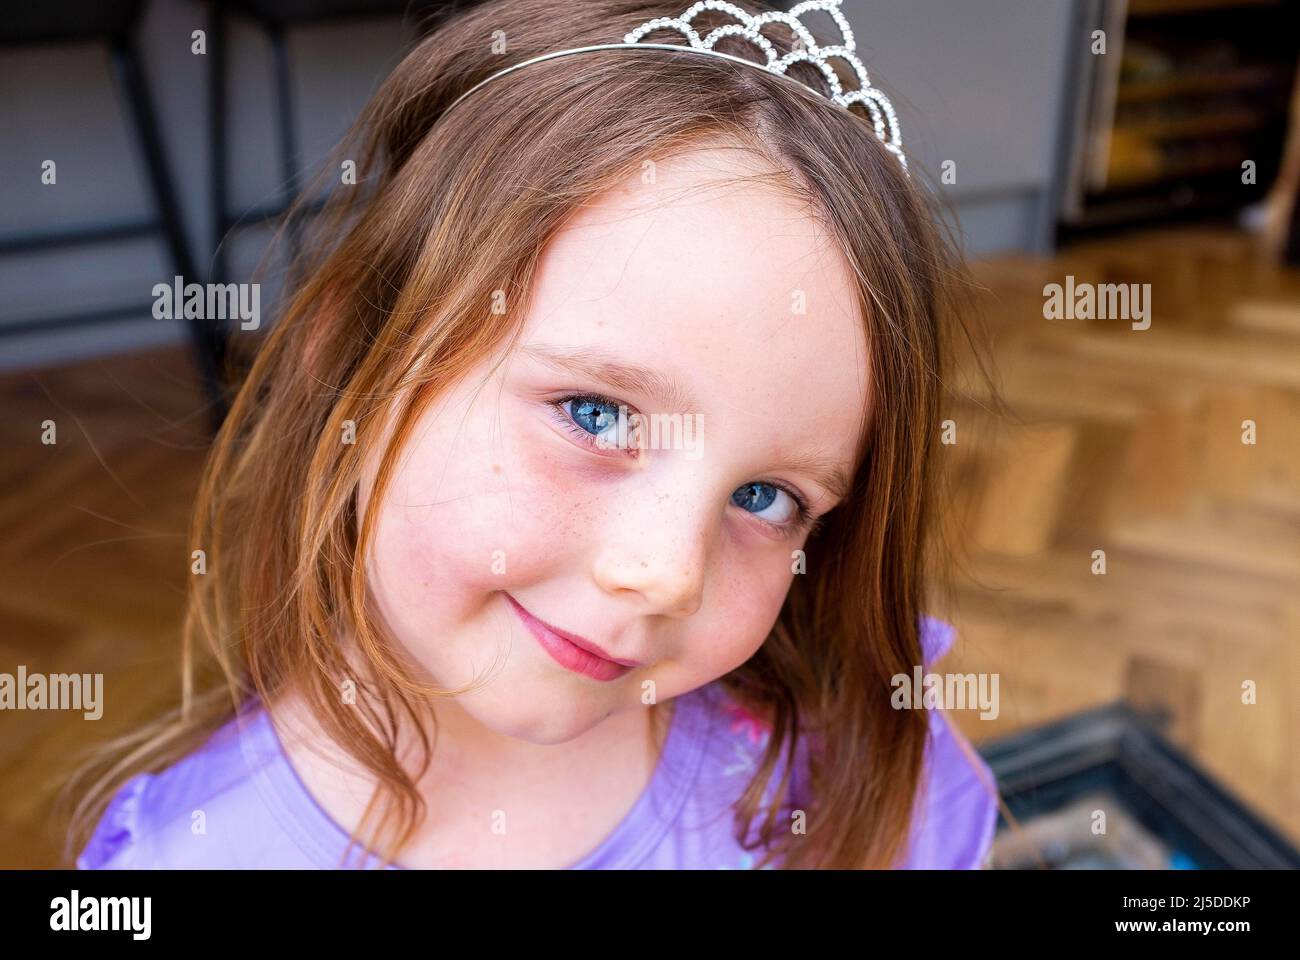 Pretty young five year old girl with blue eyes wearing a toy tiara Stock Photo